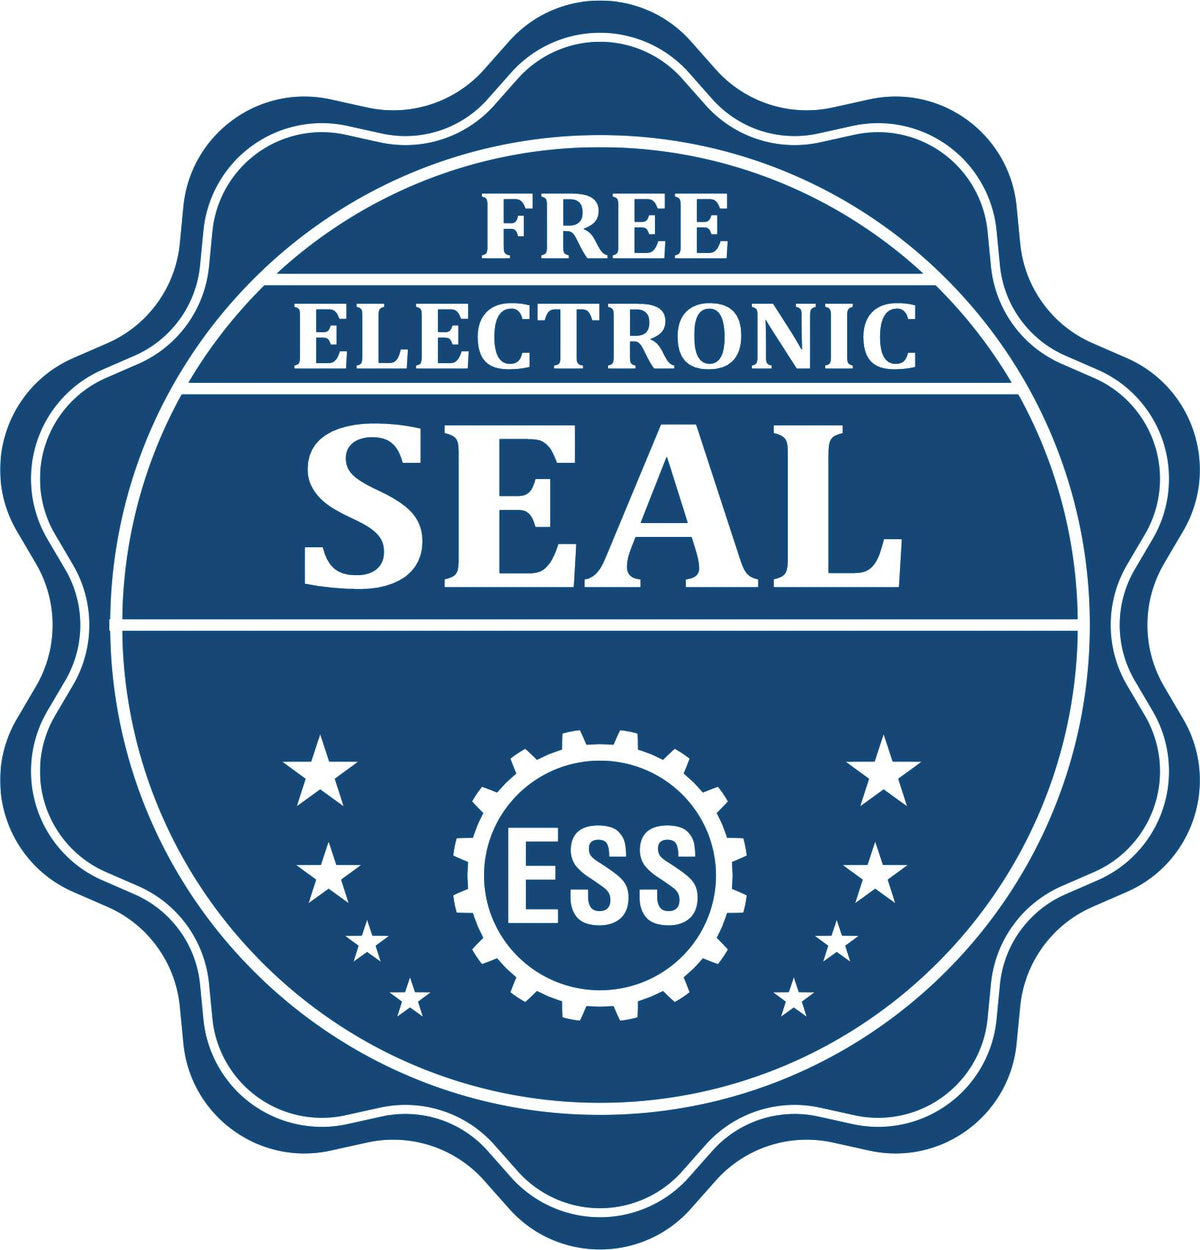 A badge showing a free electronic seal for the Slim Pre-Inked New York Landscape Architect Seal Stamp with stars and the ESS gear on the emblem.